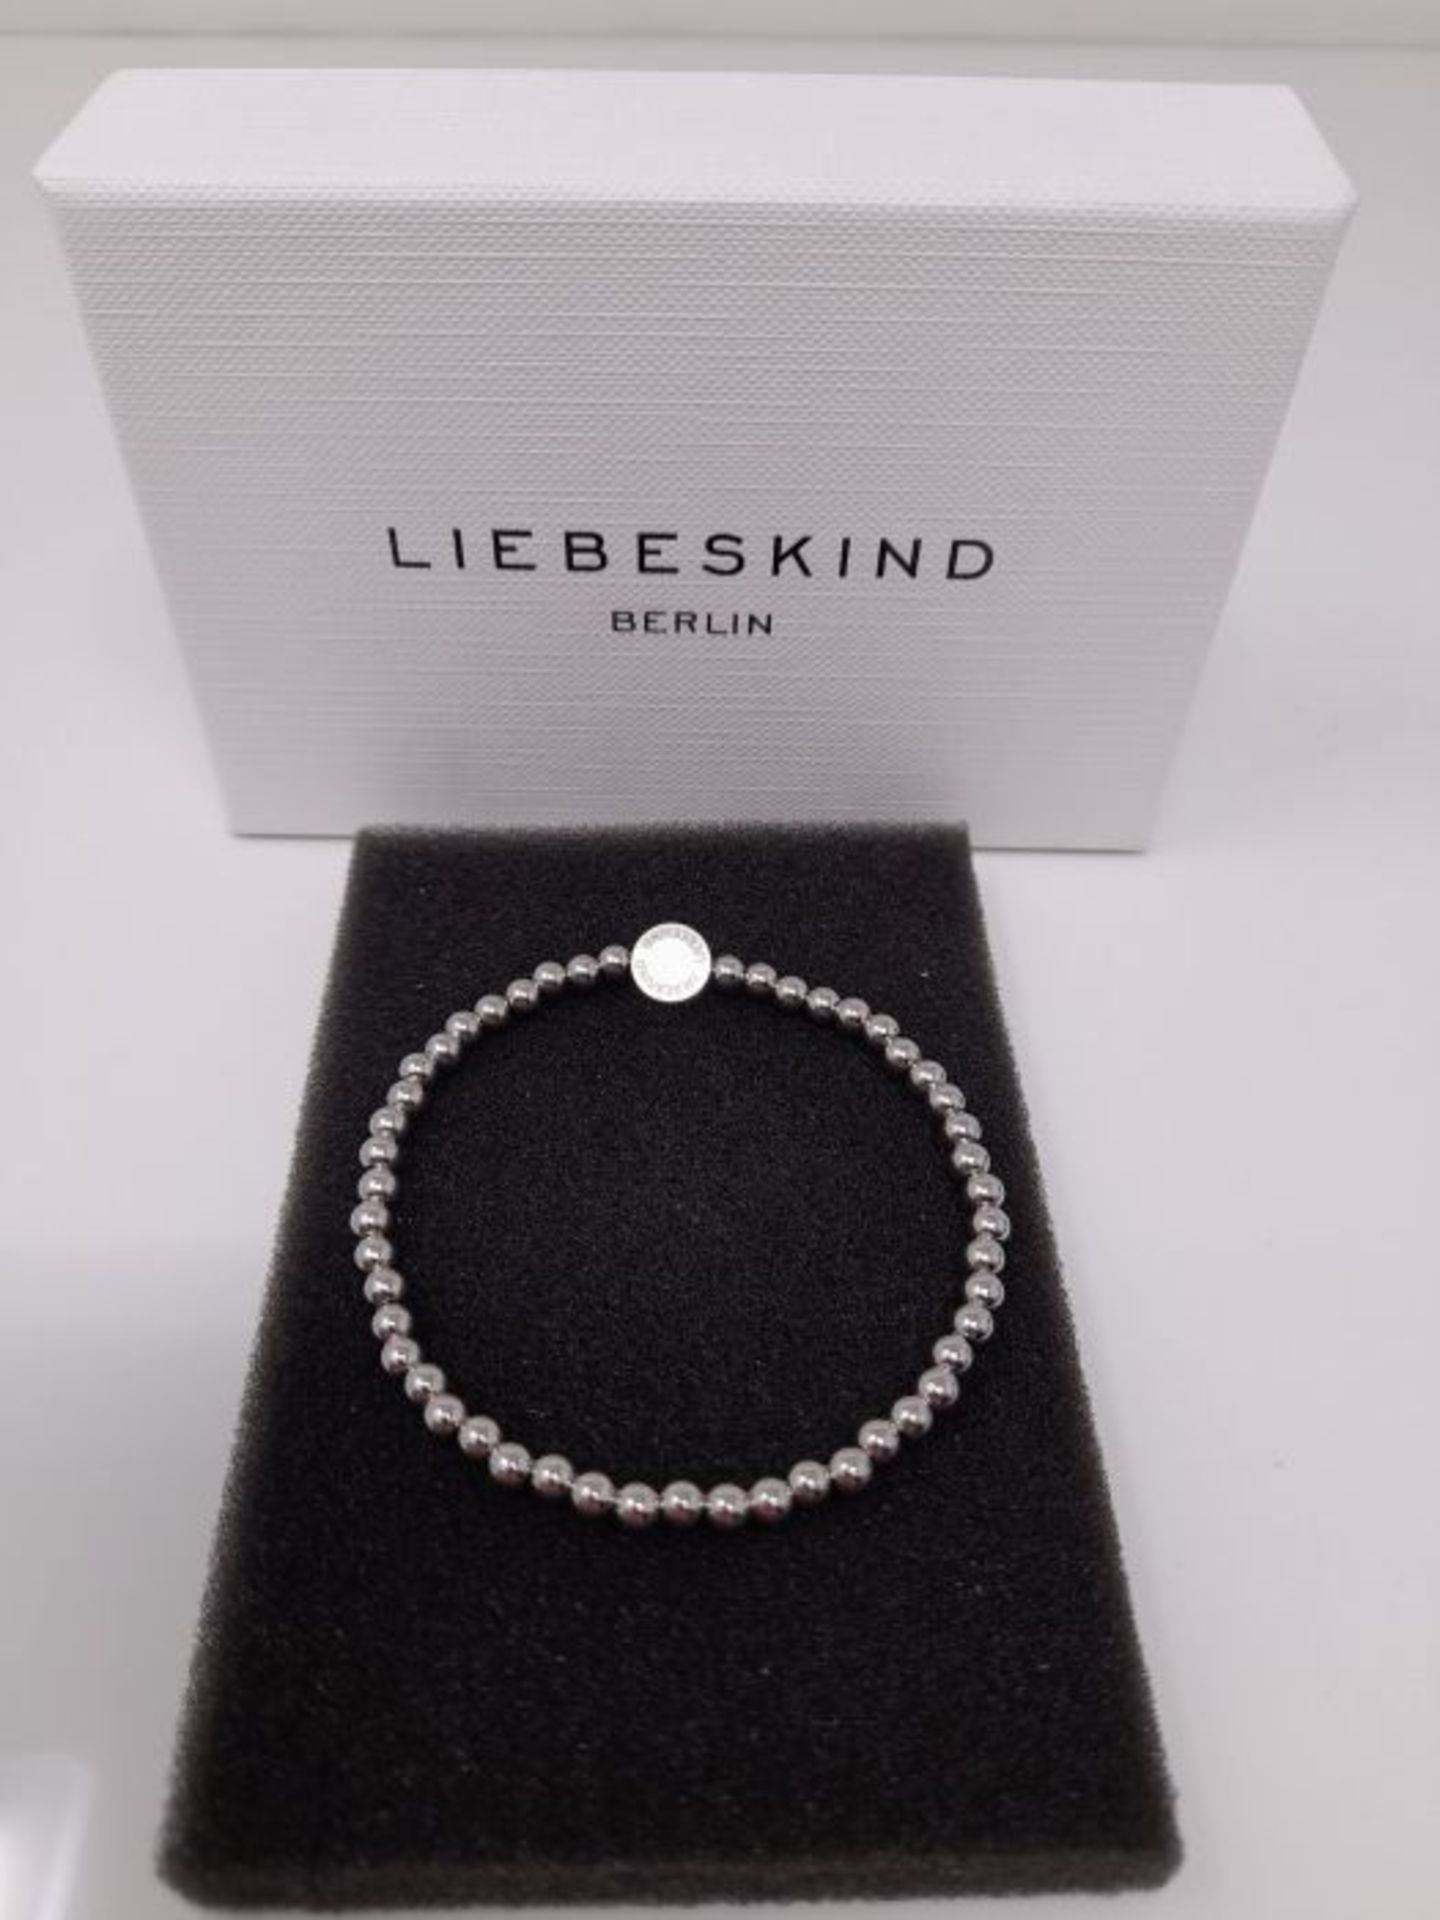 [CRACKED] LIEBESKIND BERLIN Beads 6mm mit Logotag in Edelstahl - Image 2 of 2